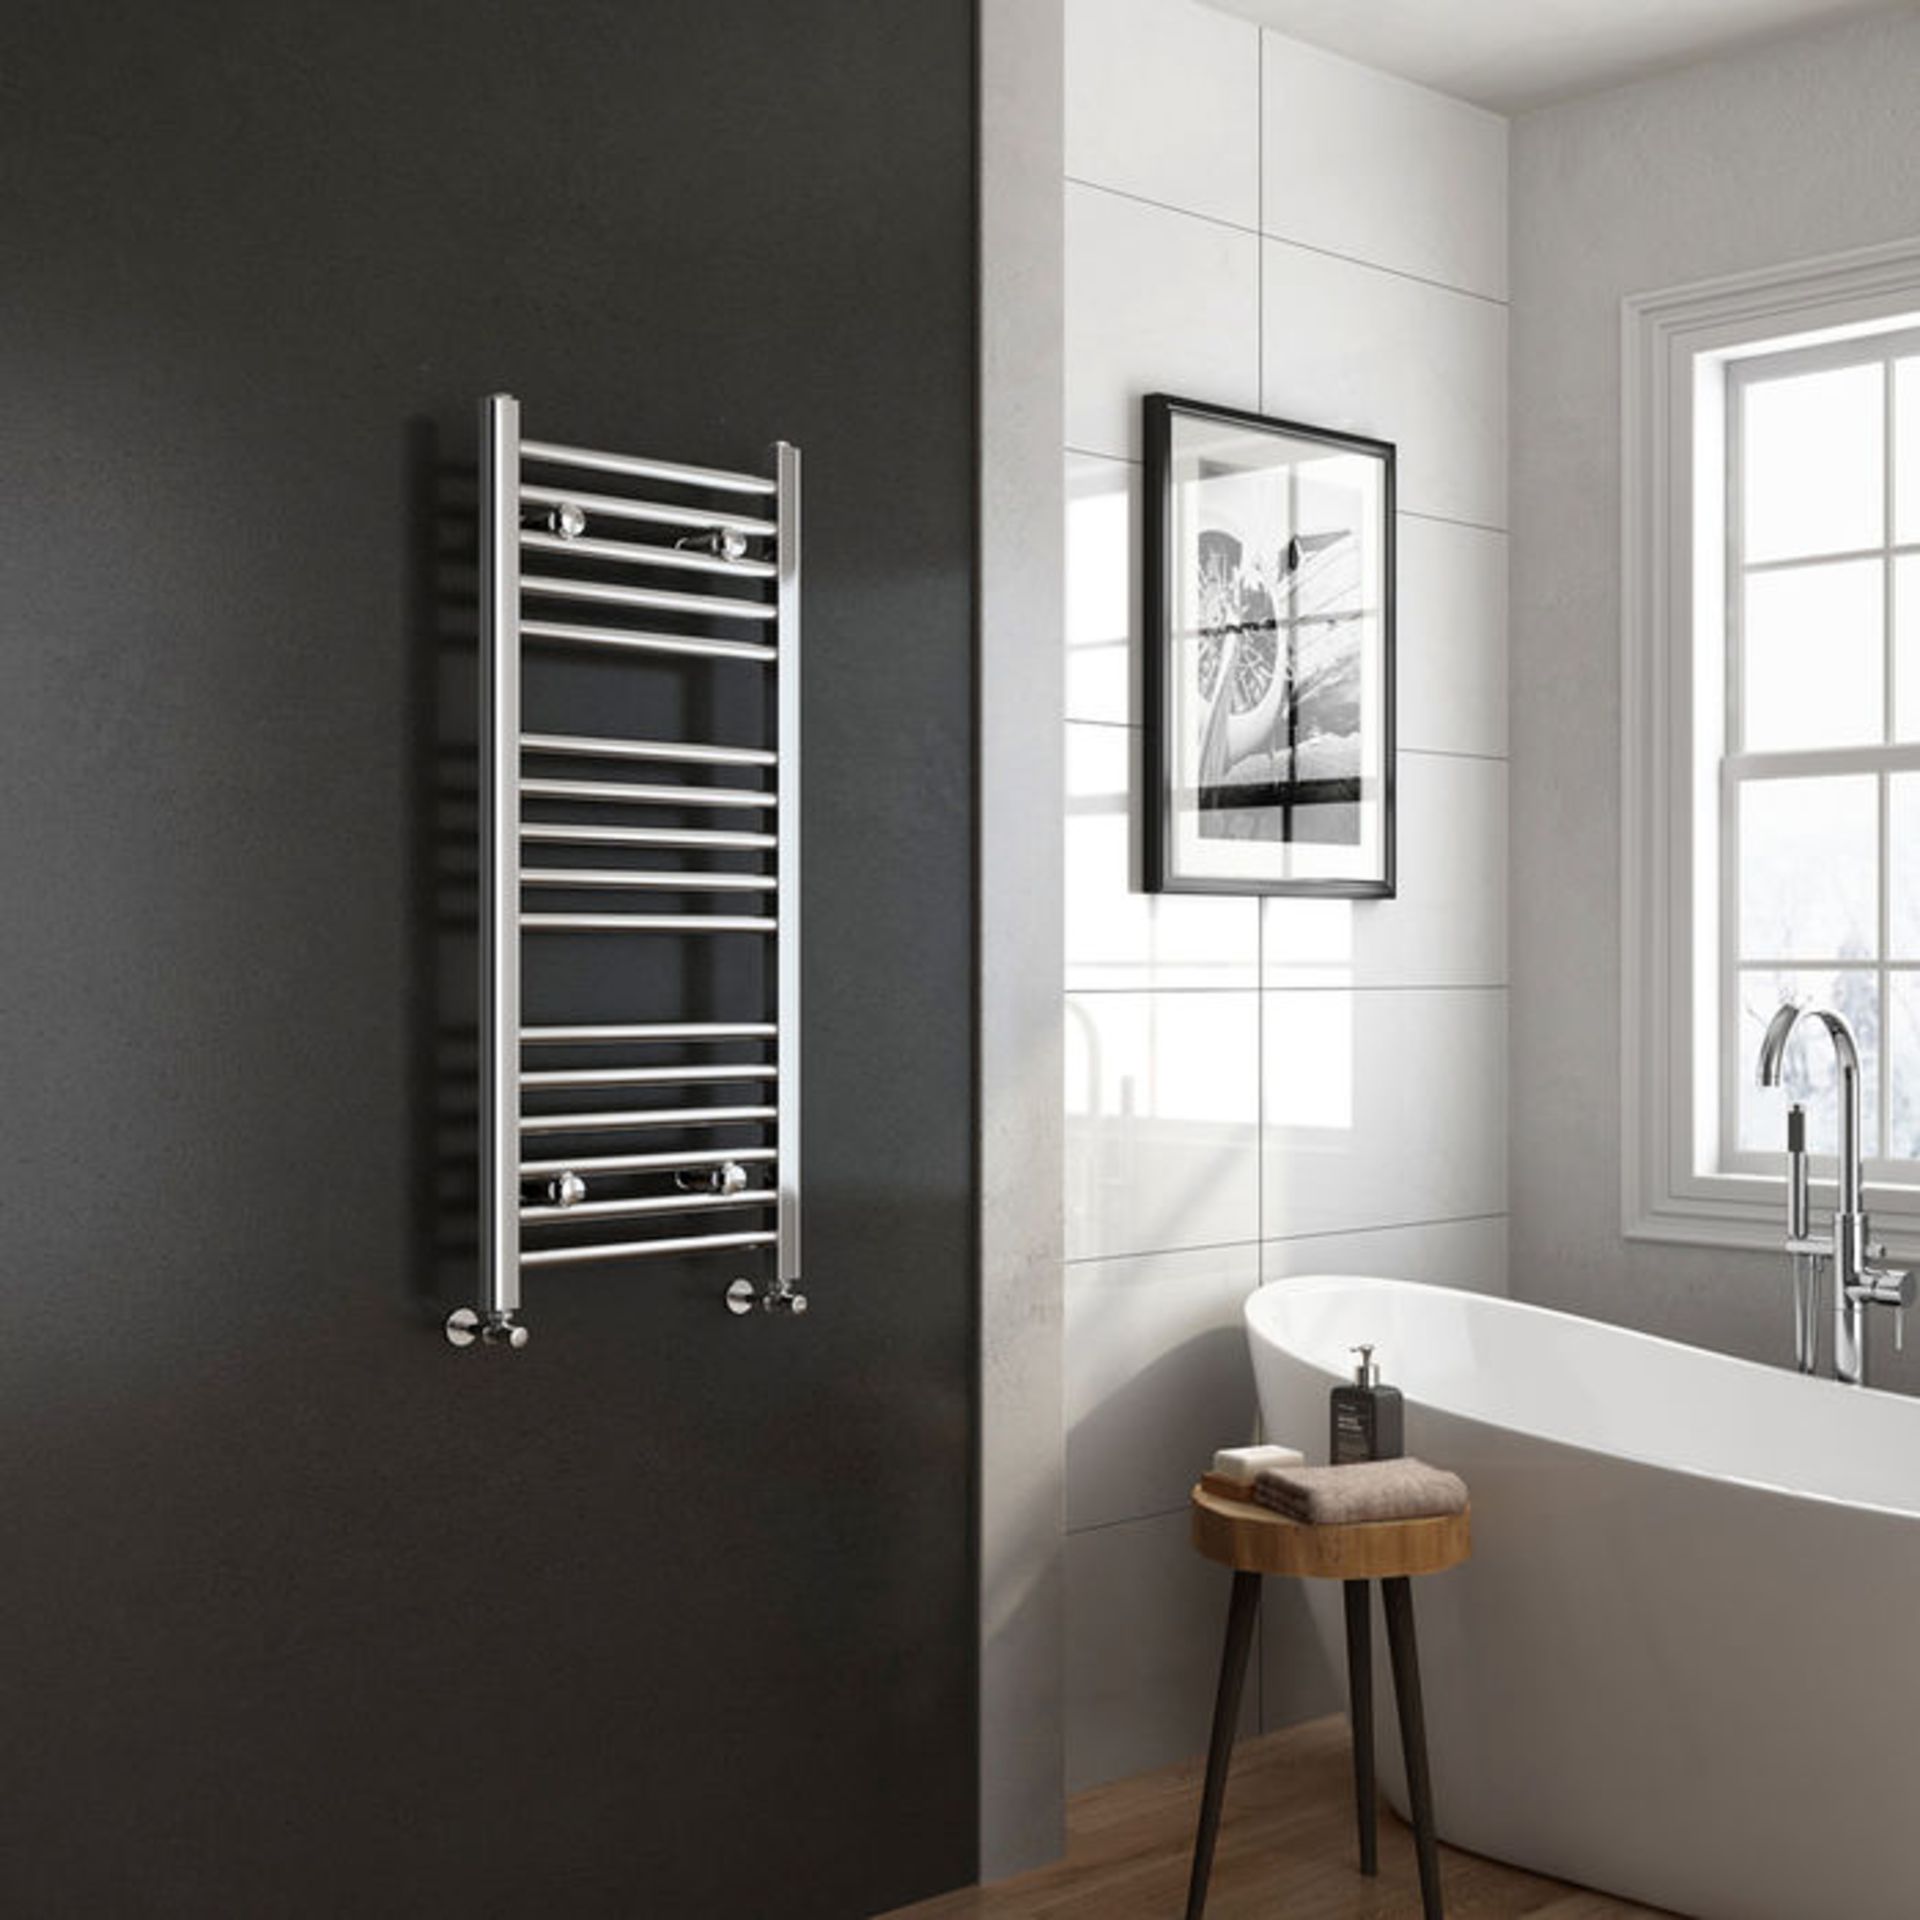 Brand New (HM133) 1000x450mm - 25mm Tubes - Chrome Heated Straight Rail Ladder Towel Radiator. This - Image 4 of 4